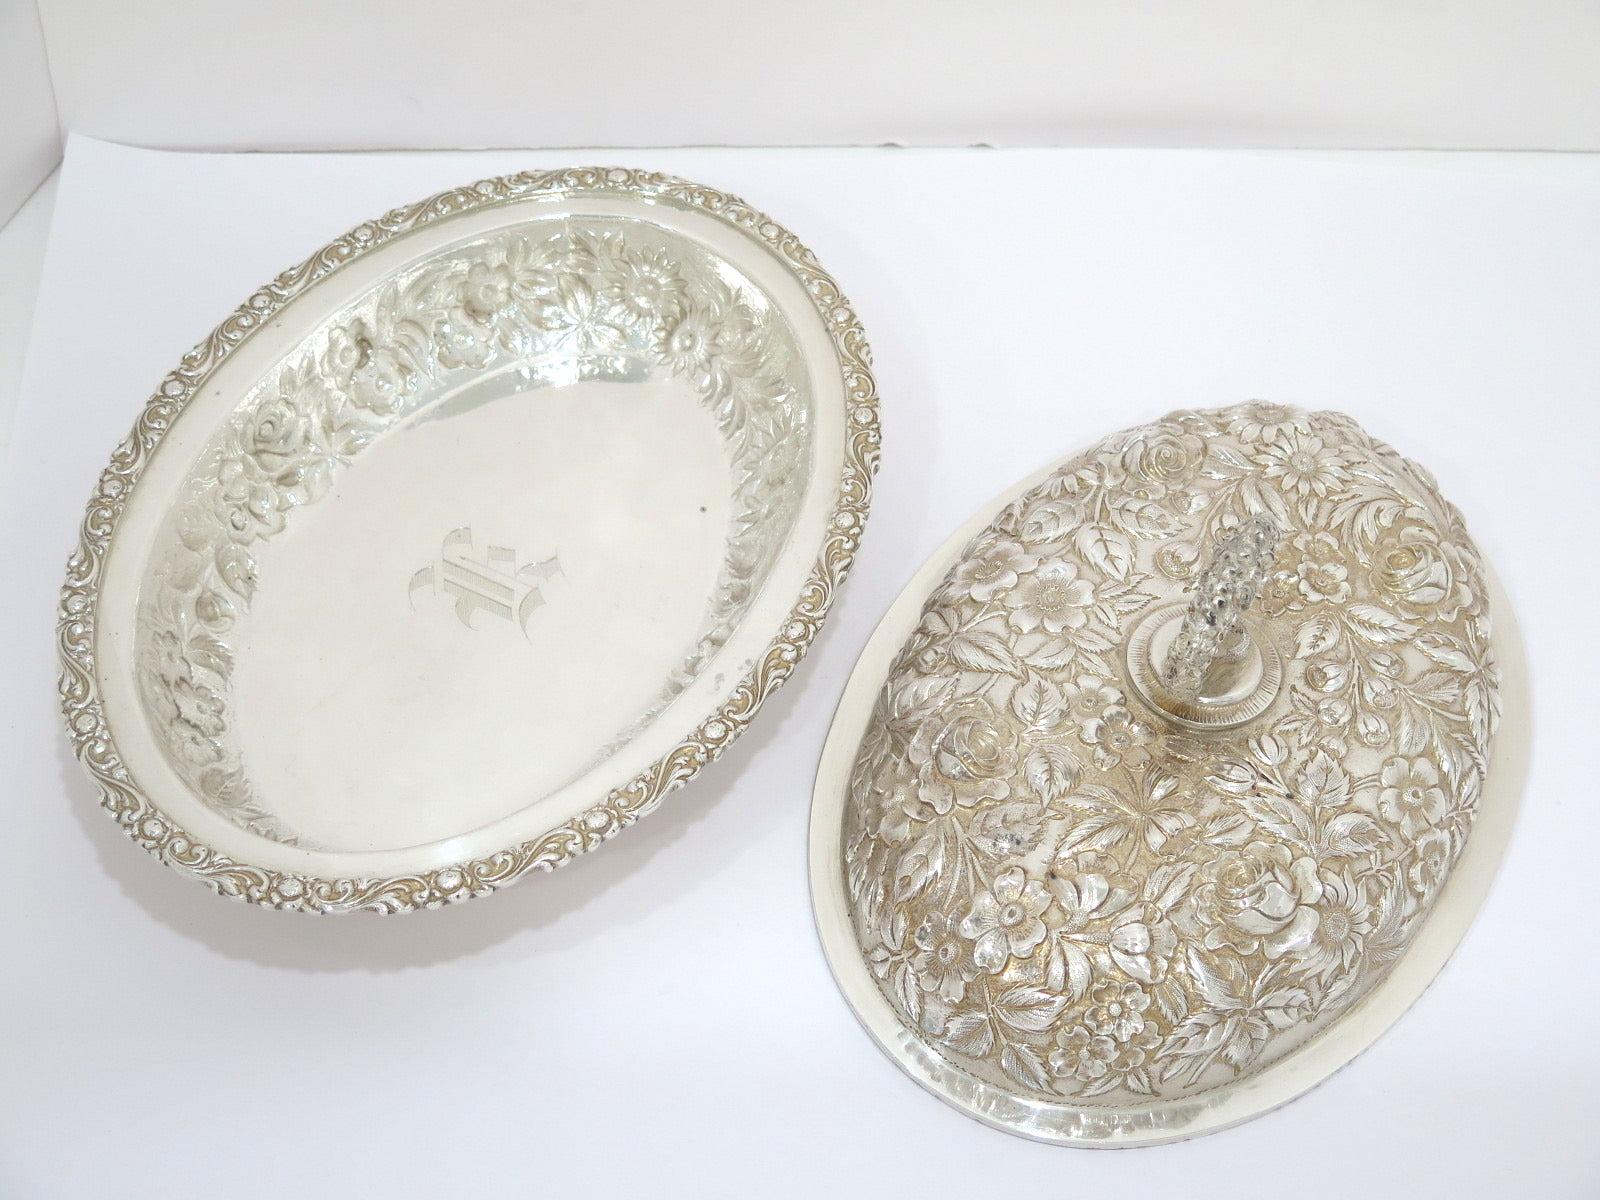 Repoussé 11 3/8 in Sterling Silver Baltimore Antique Floral Repousse Covered Serving Dish